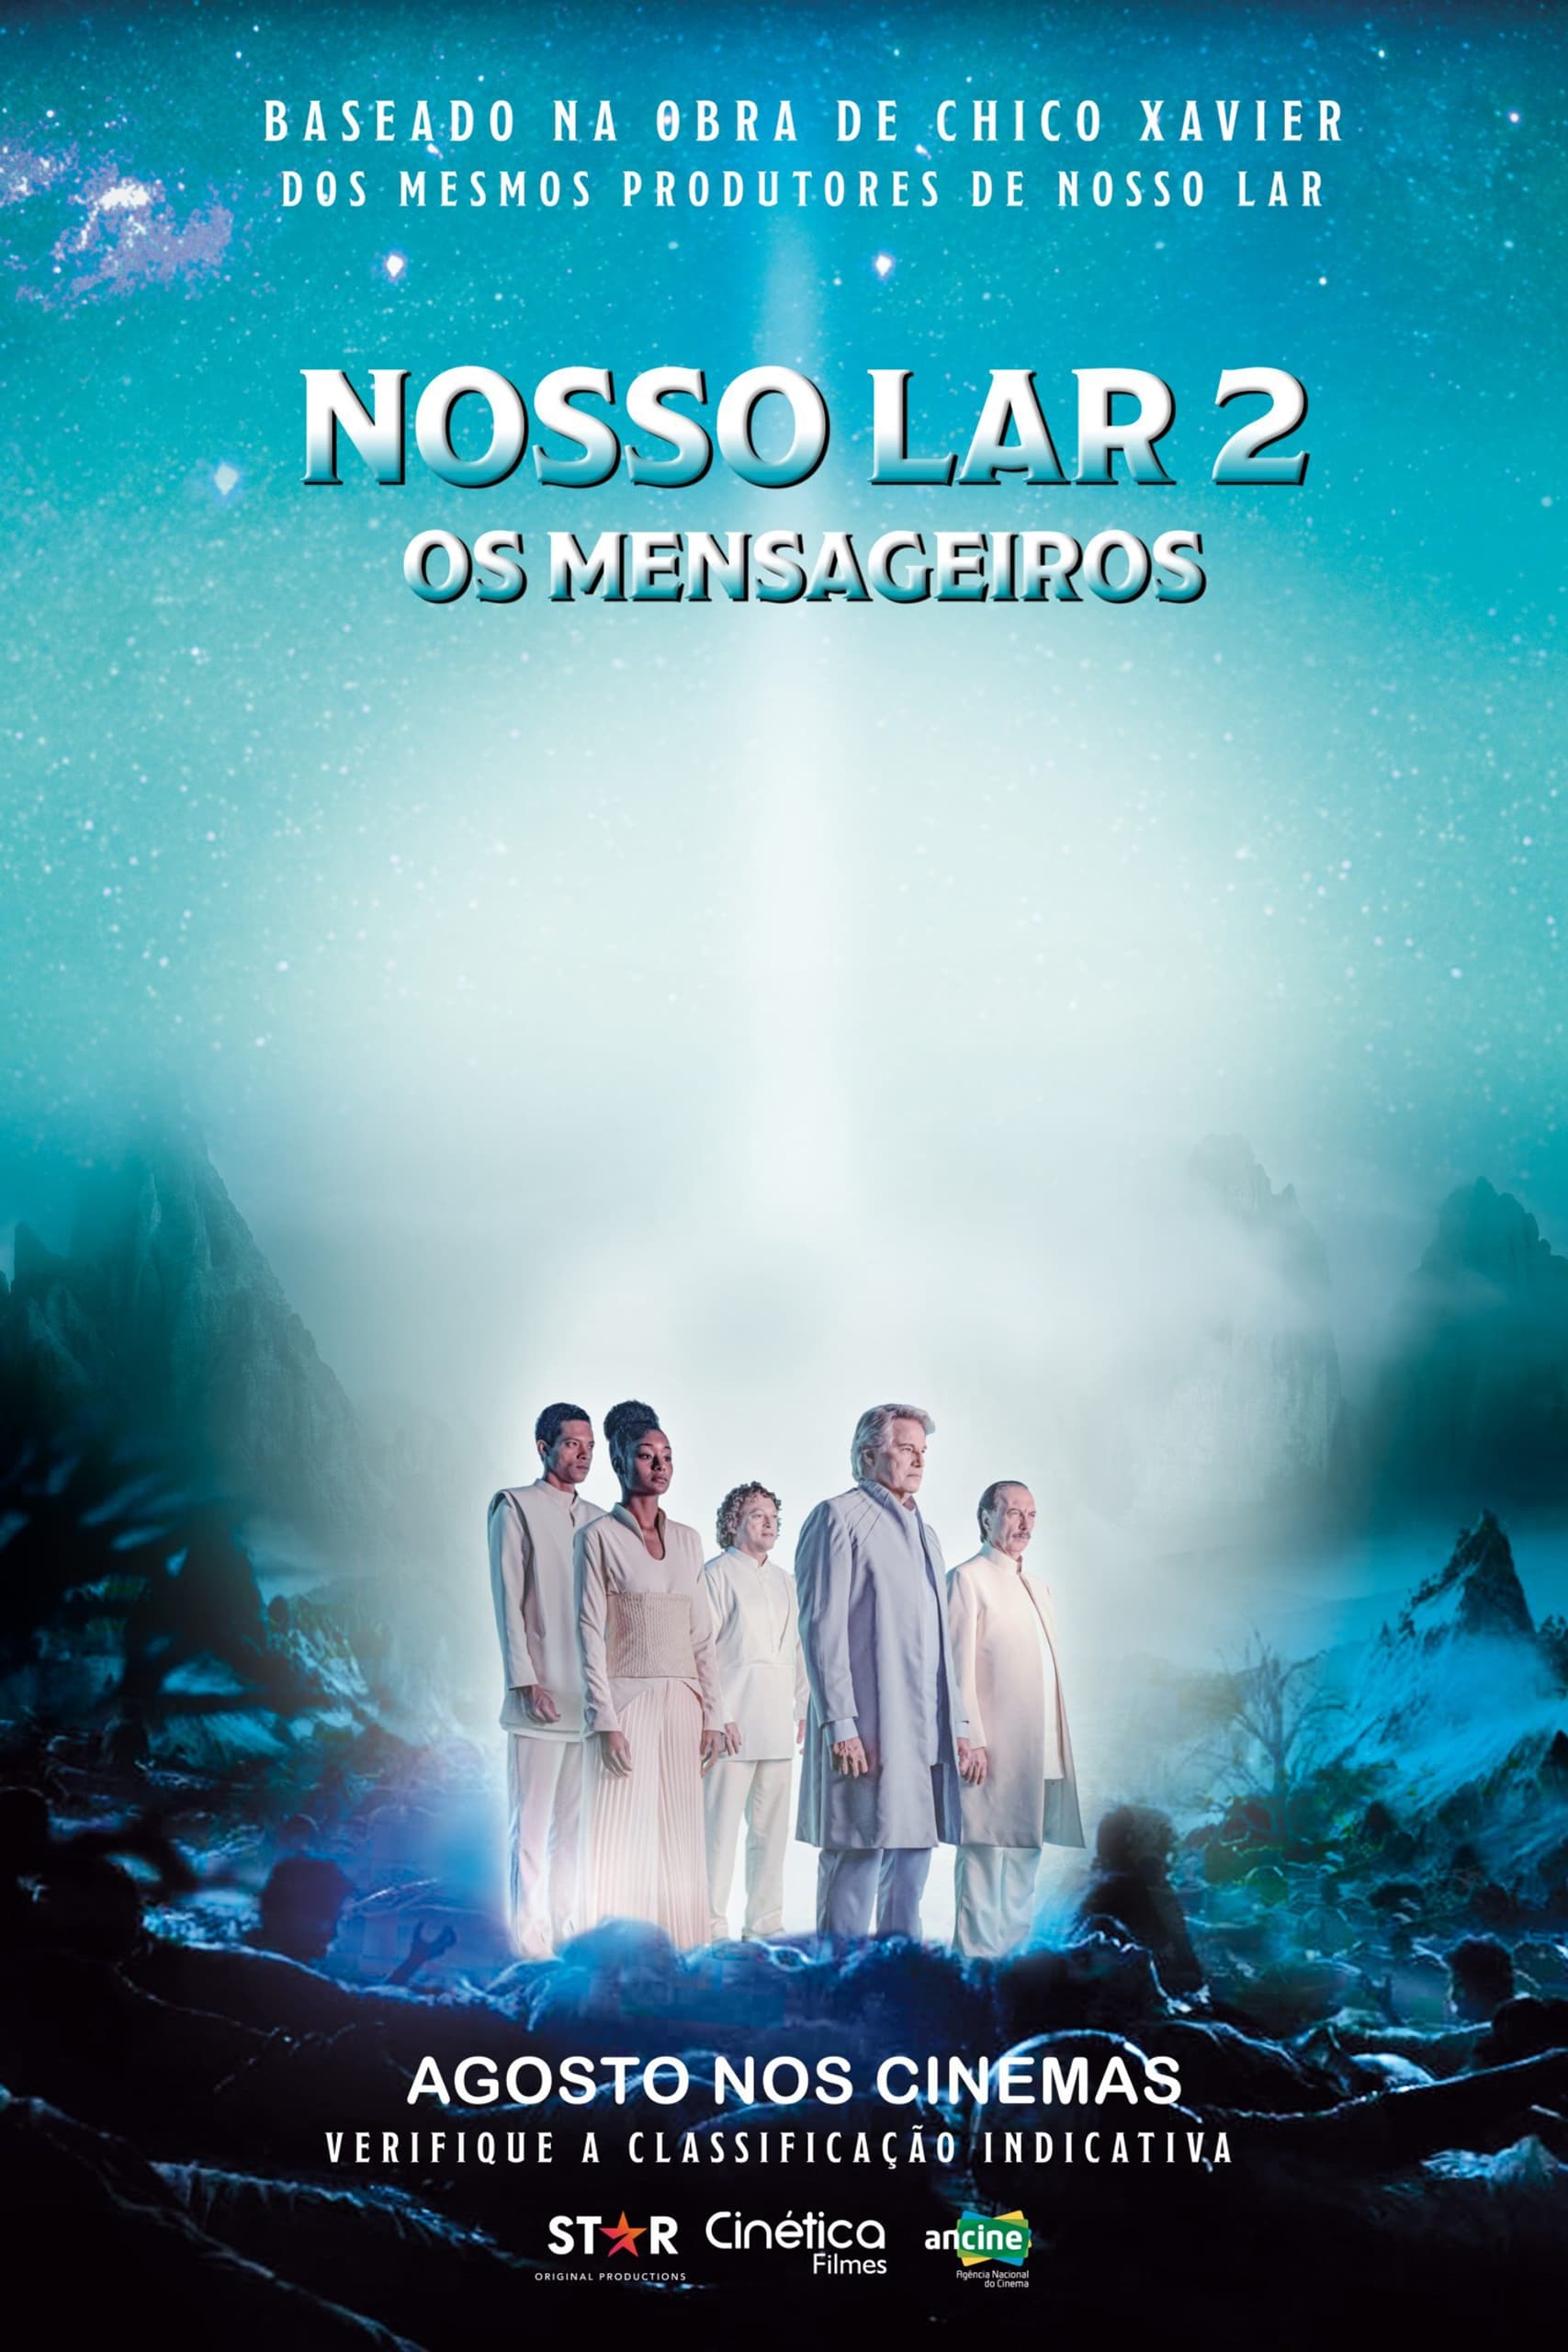 Astral City 2: The Messengers